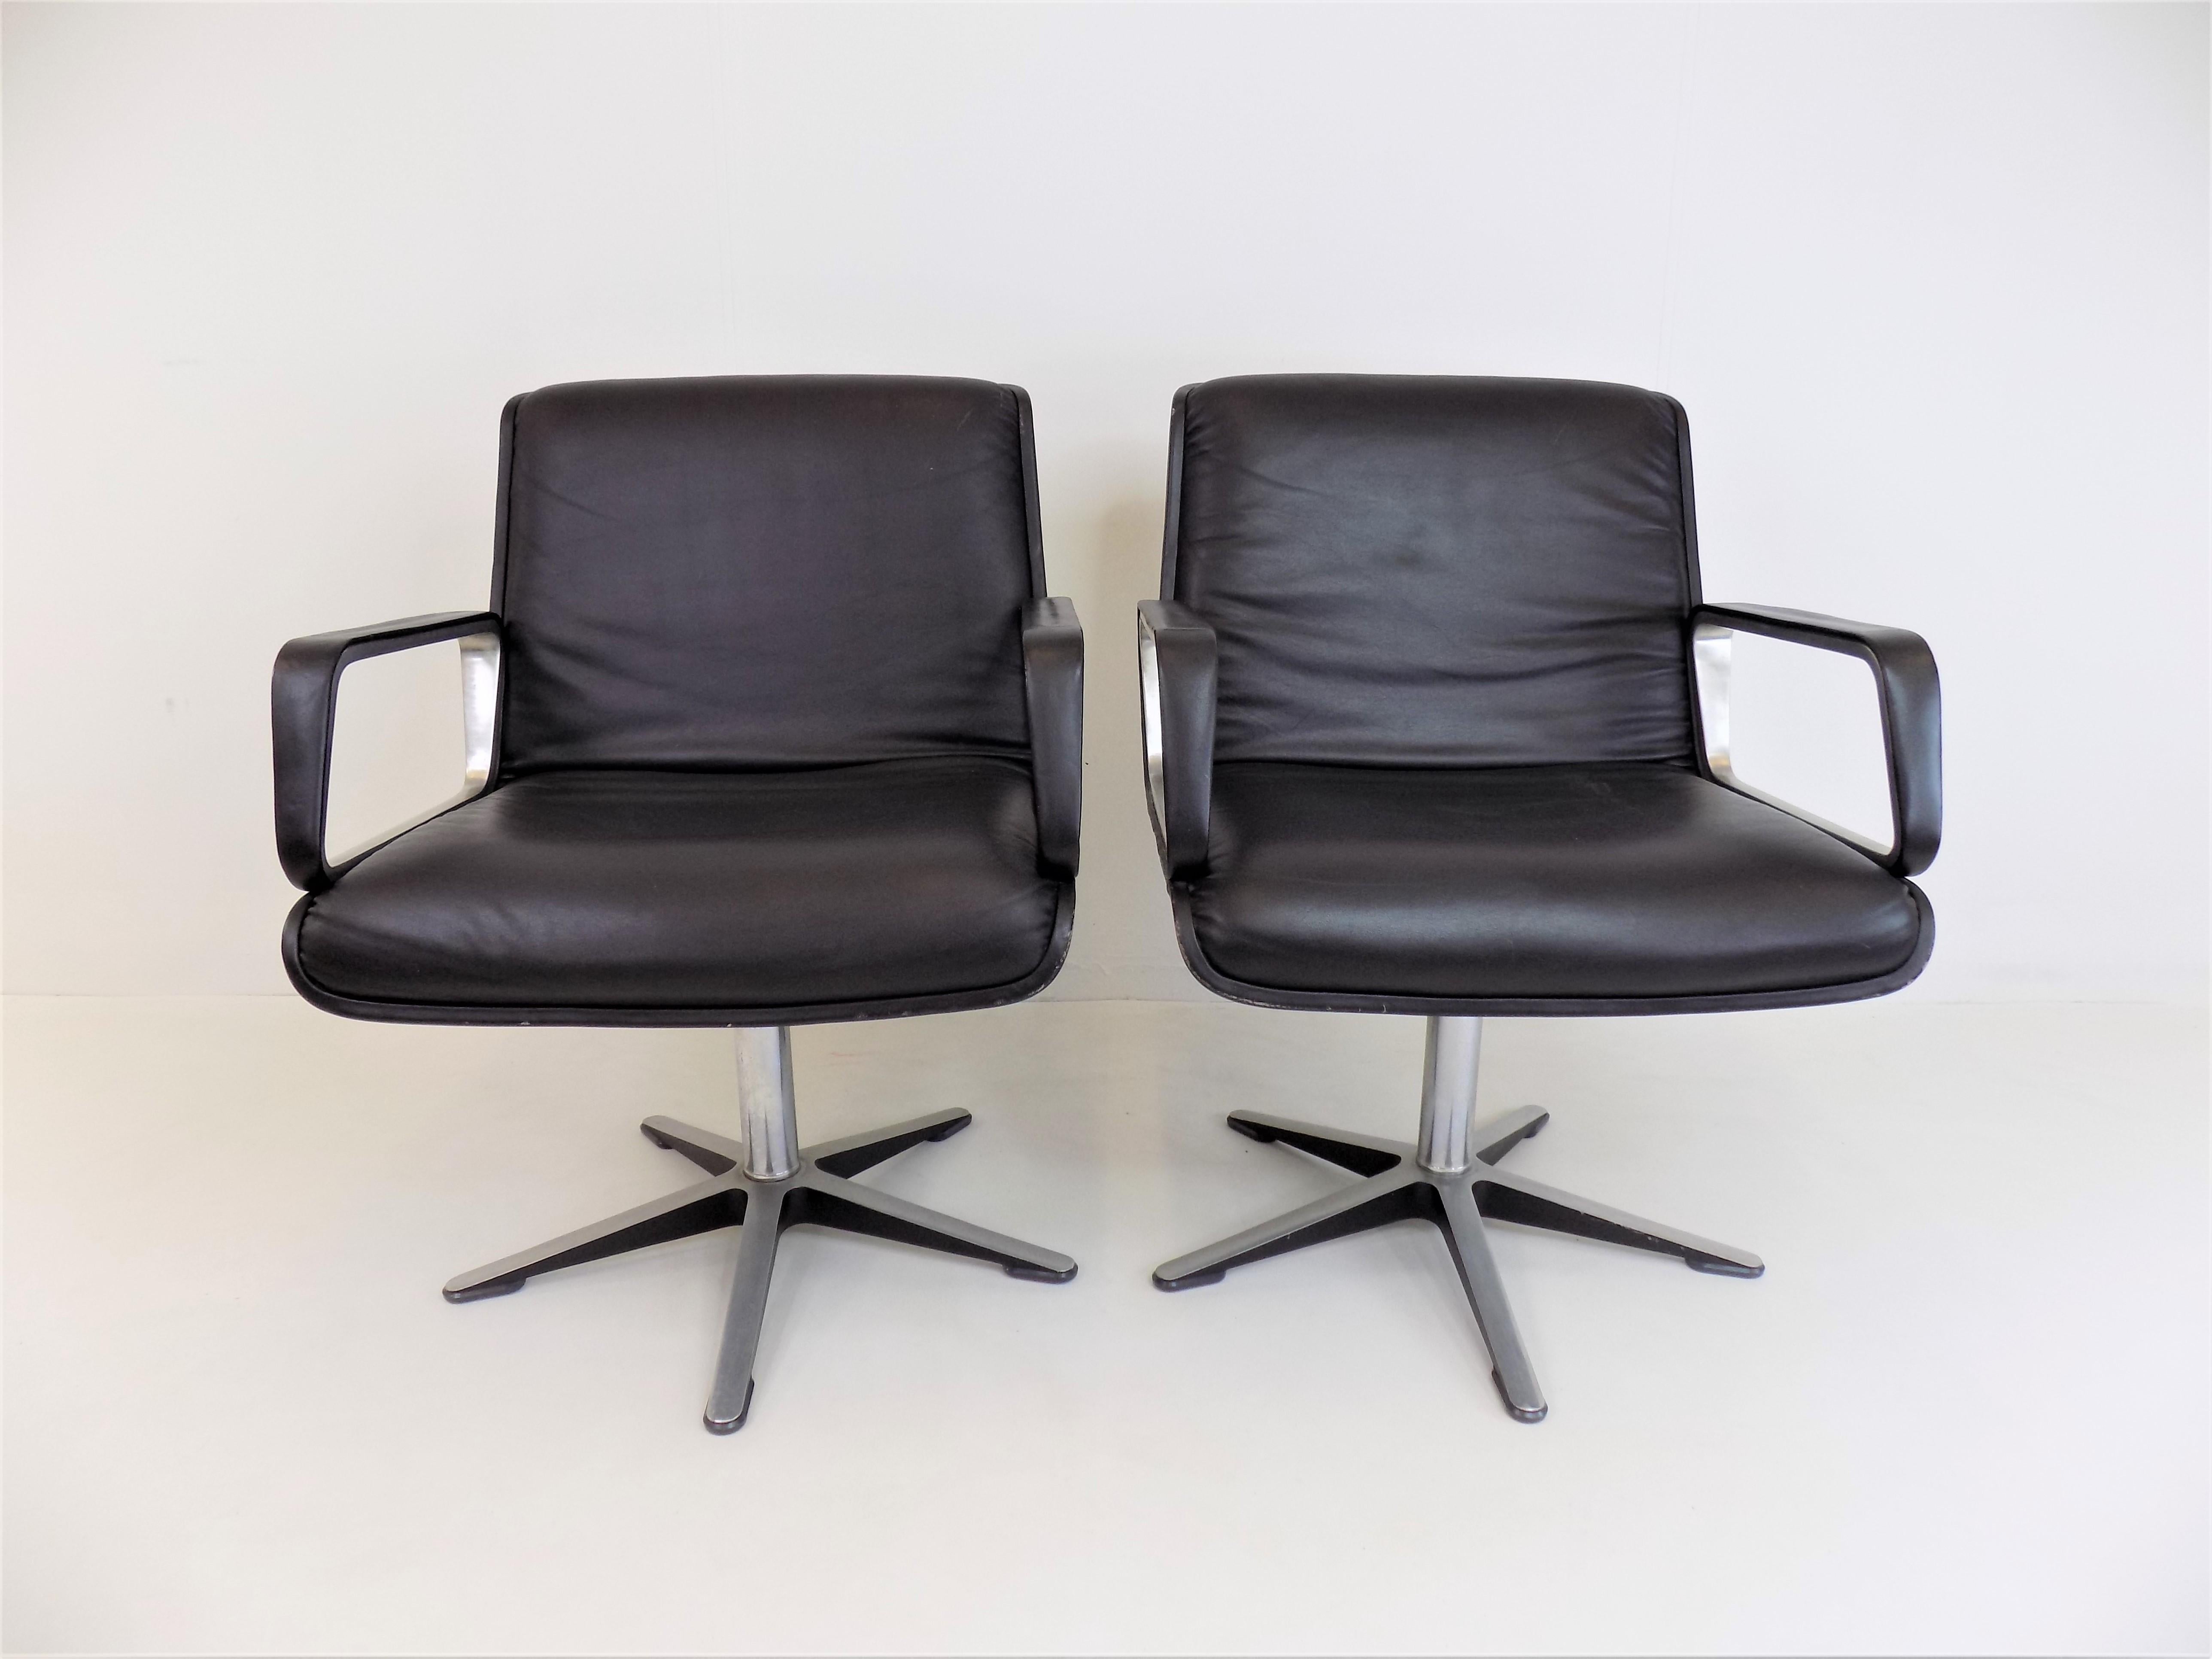 Mid-20th Century Wilkhahn Delta set of 2 dining/conference chairs from Delta Group